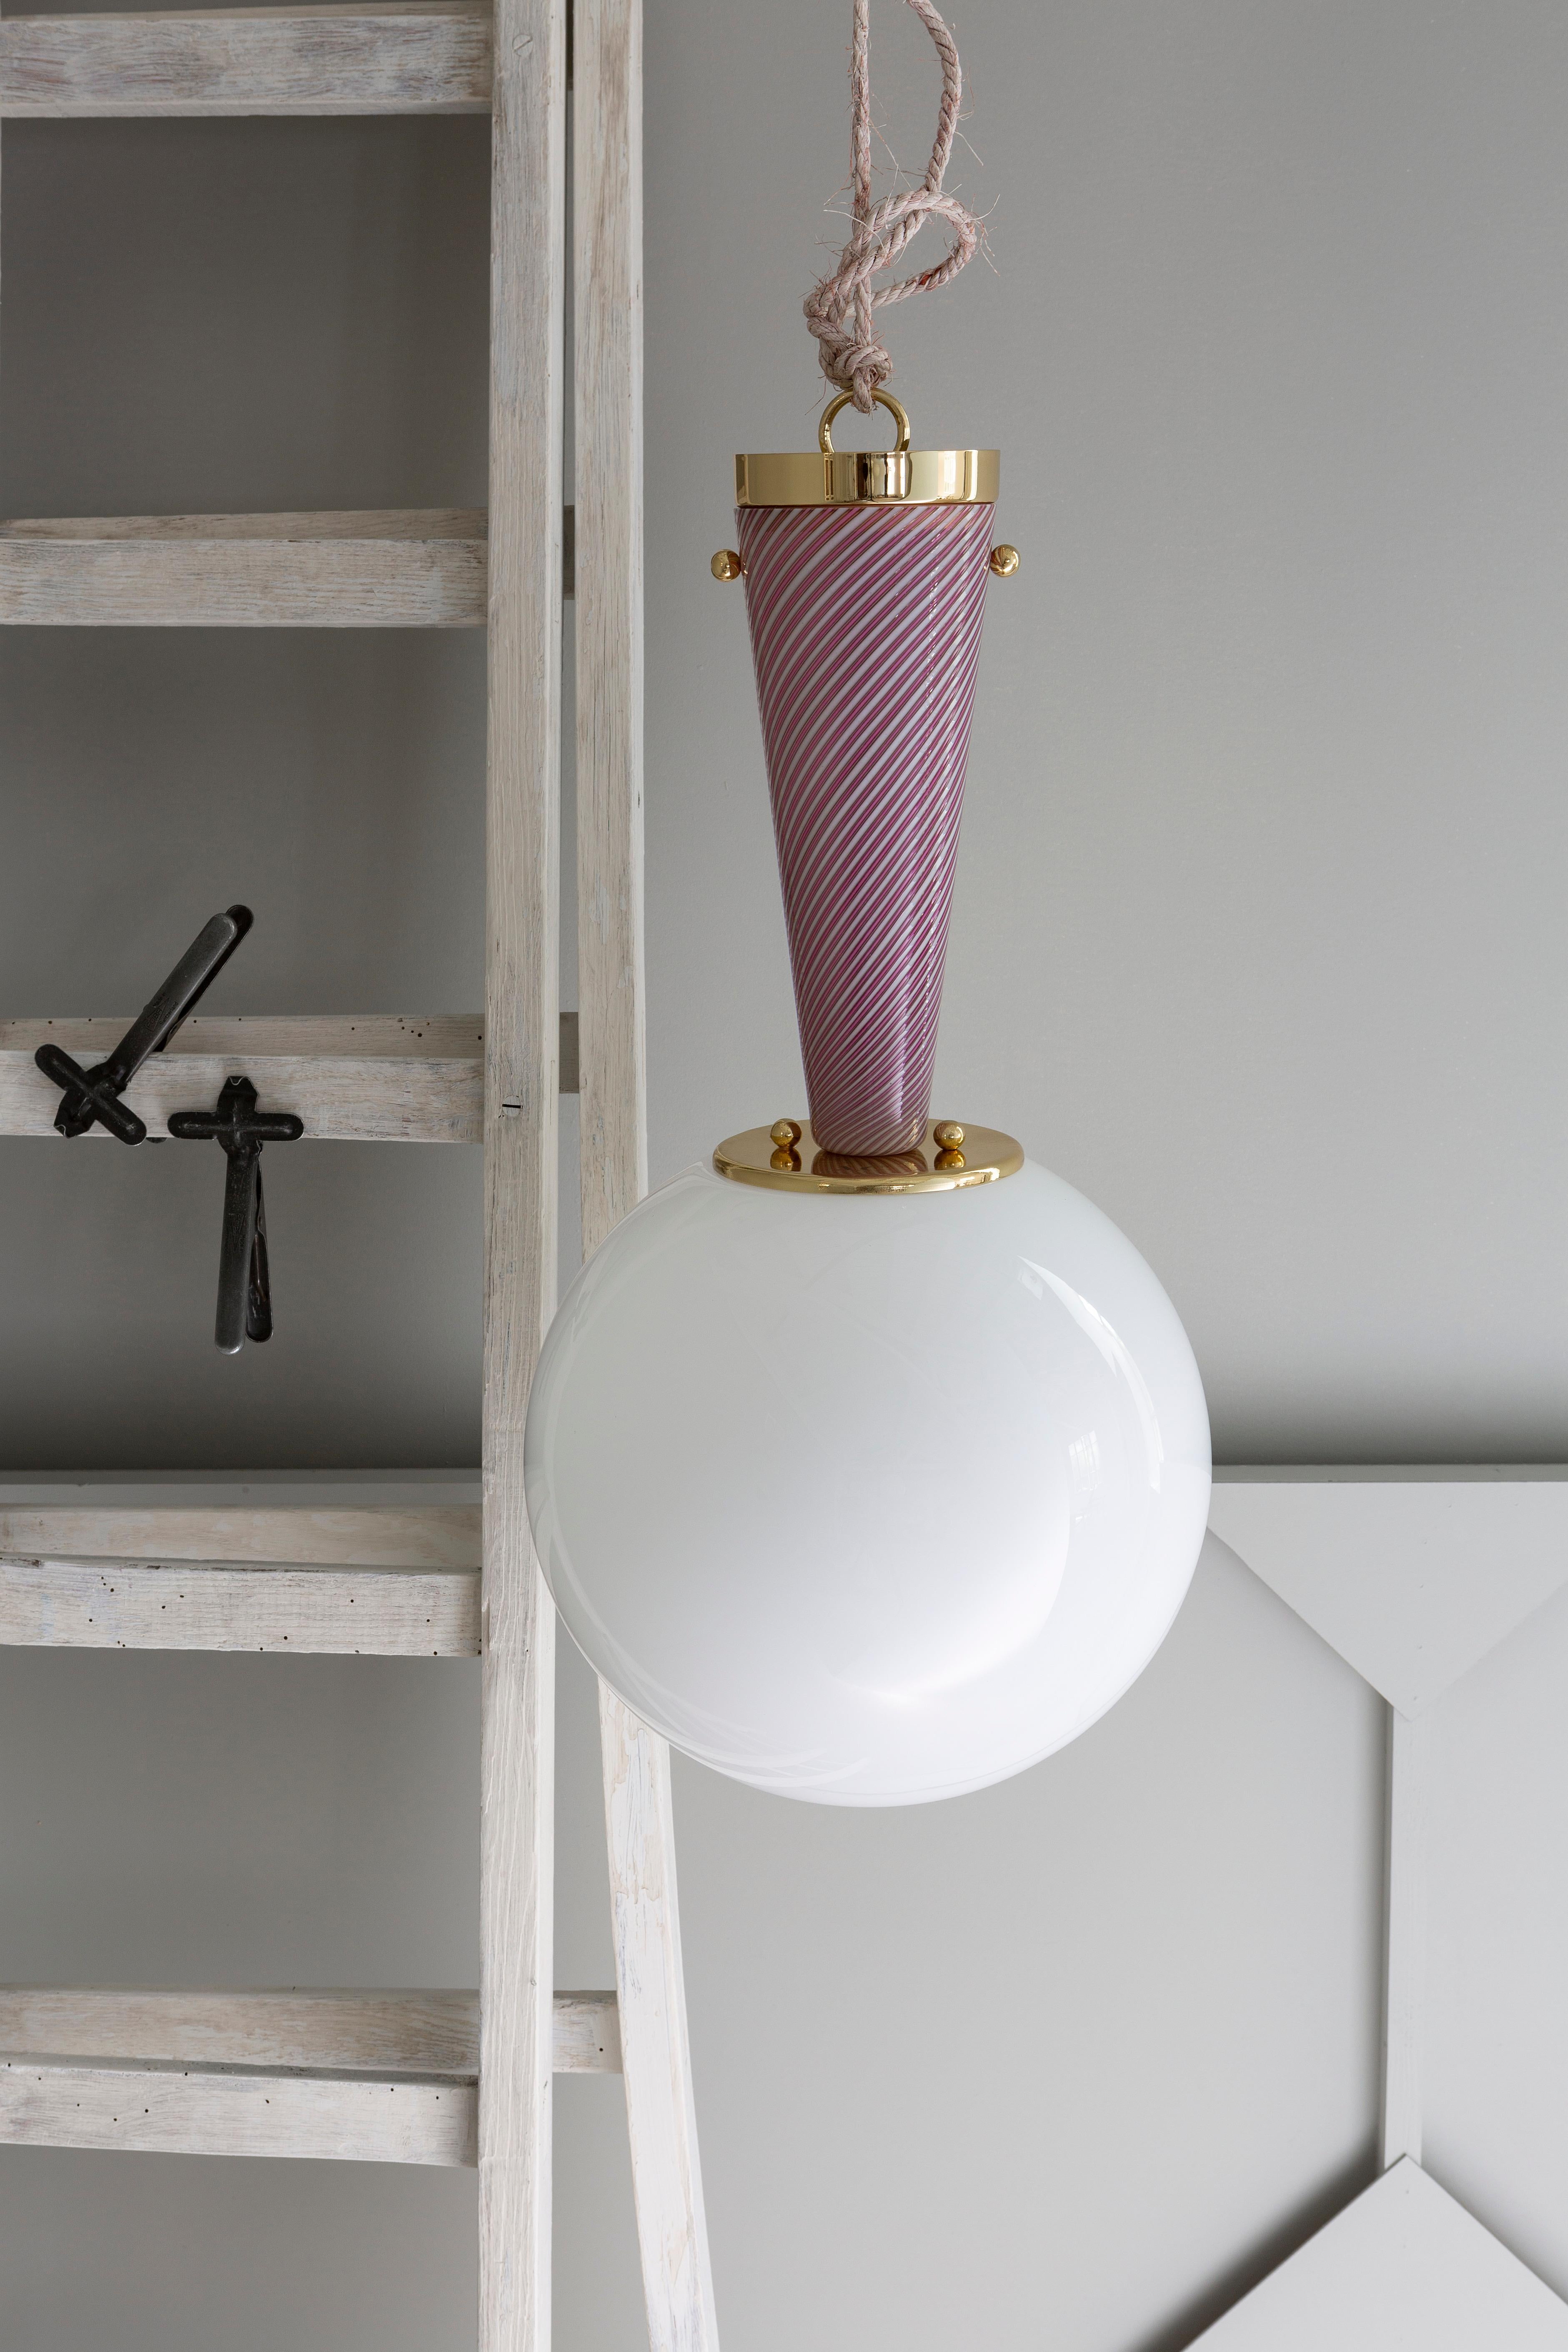 Upside down pendant lamp 30 by Magic Circus Editions
Dimensions: Ø 30 x W 30 x H 57.9 cm
Materials: Brass, mouth blown glass
Available finishes: Lacquered polished brass / nickel
Available colours: Blu Senza Tempo, Verde Immaginario, Rosa da